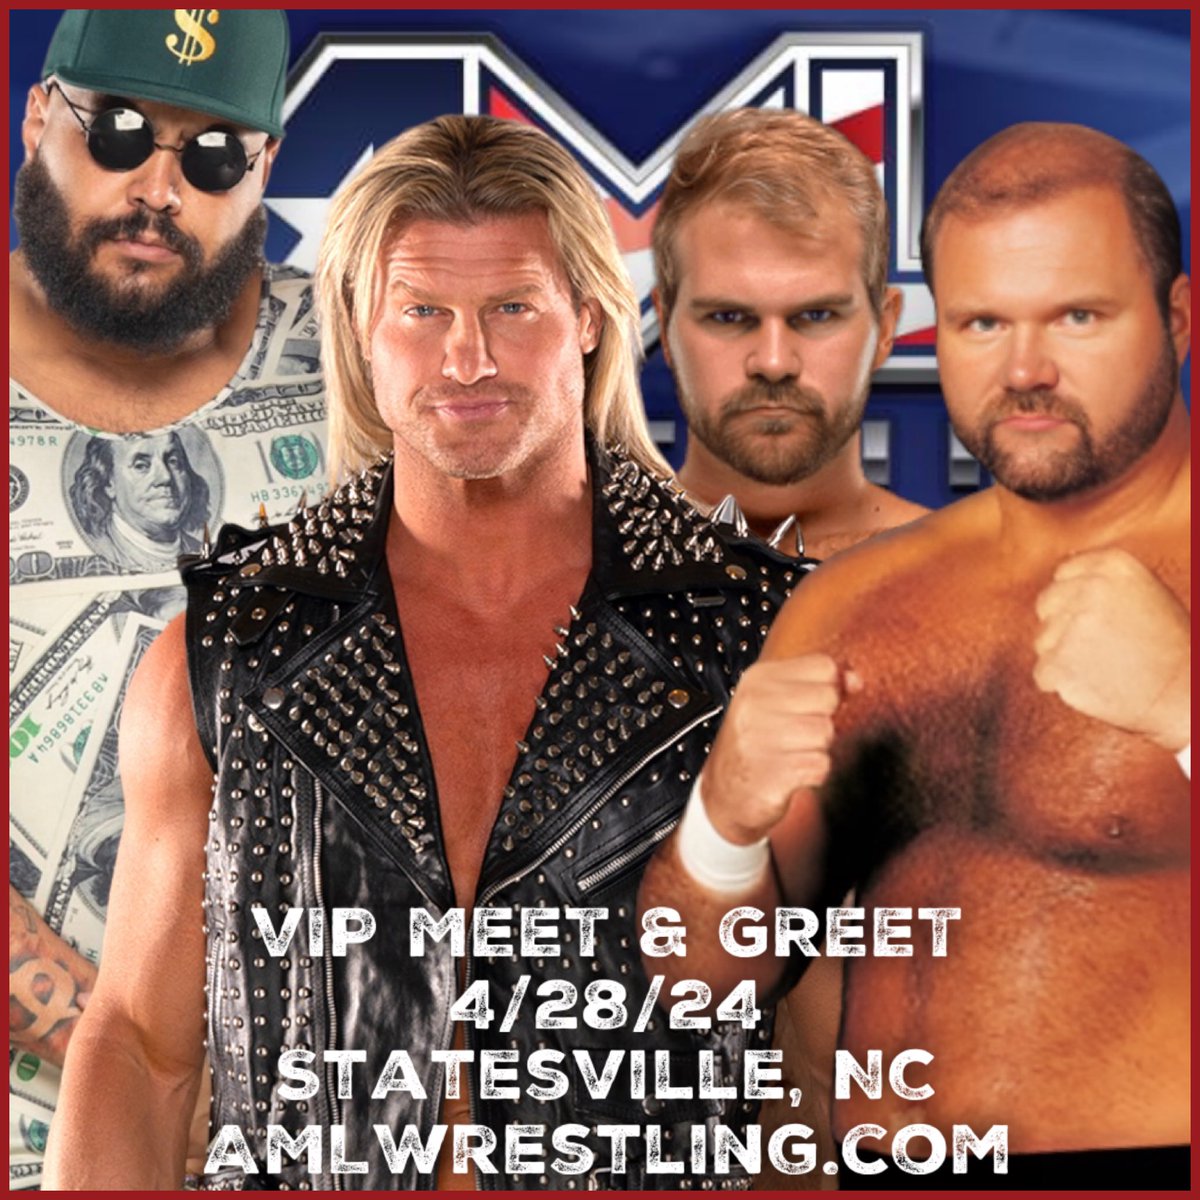 🚨AML Wrestling presents Wanted Man Meet Special Guests @NicTNemeth, @TheArnShow, @BrockAndersonnn & @AJFrancis410 with the VIP Meet & Greet 🎟 👉 amlwrestling.com/tickets 4/28/24 West Iredell HS Statesville, NC Meet The Stars at 2pm First Match at 4pm